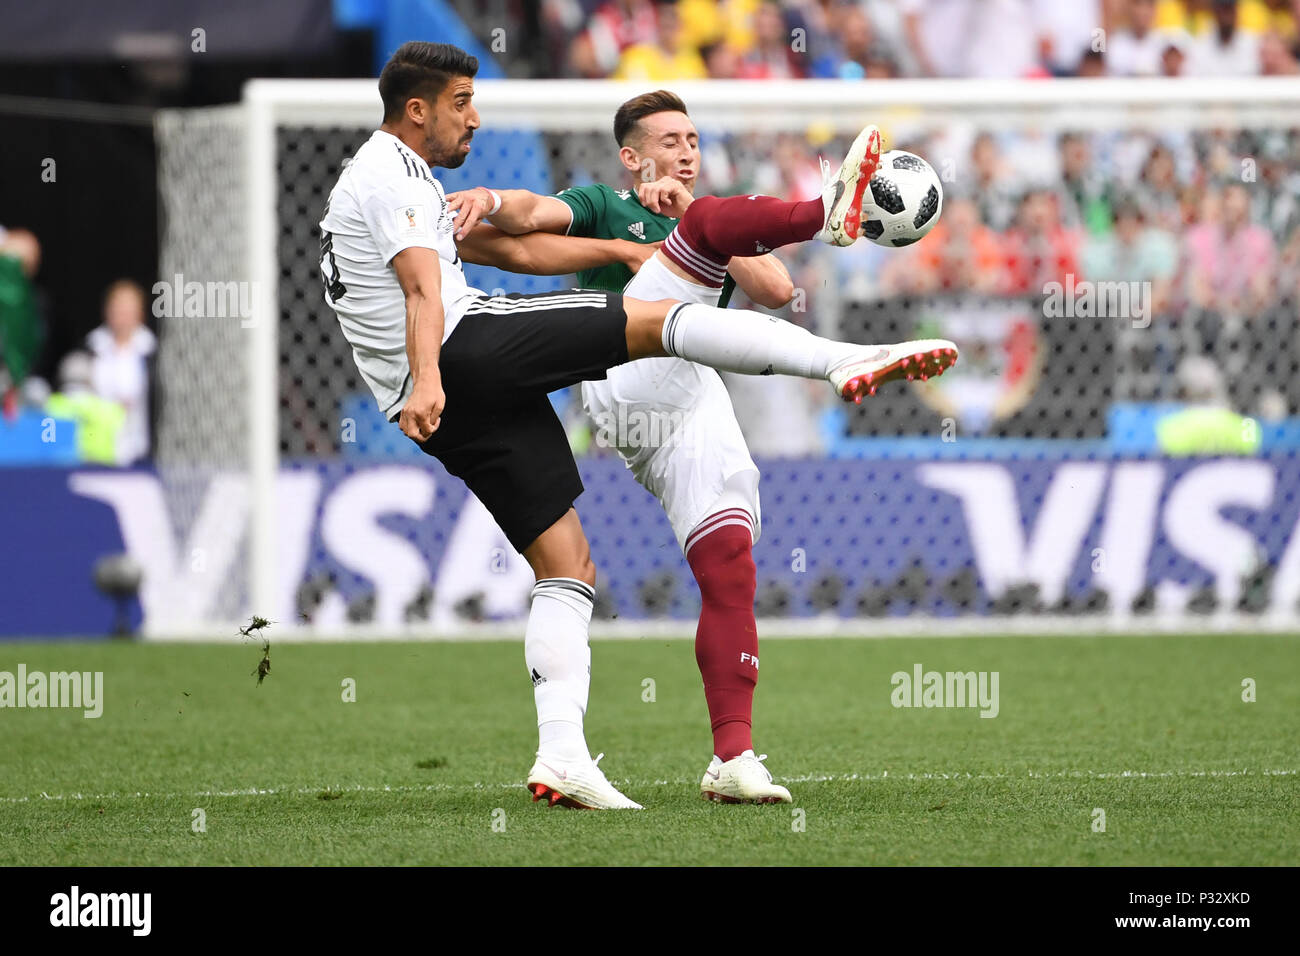 Moscow, Russia. 17th June, 2018. Sami Khedira (Germany, l.) Versus Hector Herrera (Mexico, r.). GES/Football/World Cup 2018 Russia: Germany - Mexico, 17.06.2018 GES/Soccer/Football/Worldcup 2018 Russia: Germany vs Mexico, Moscow, June 17, 2018 | usage worldwide Credit: dpa/Alamy Live News Stock Photo